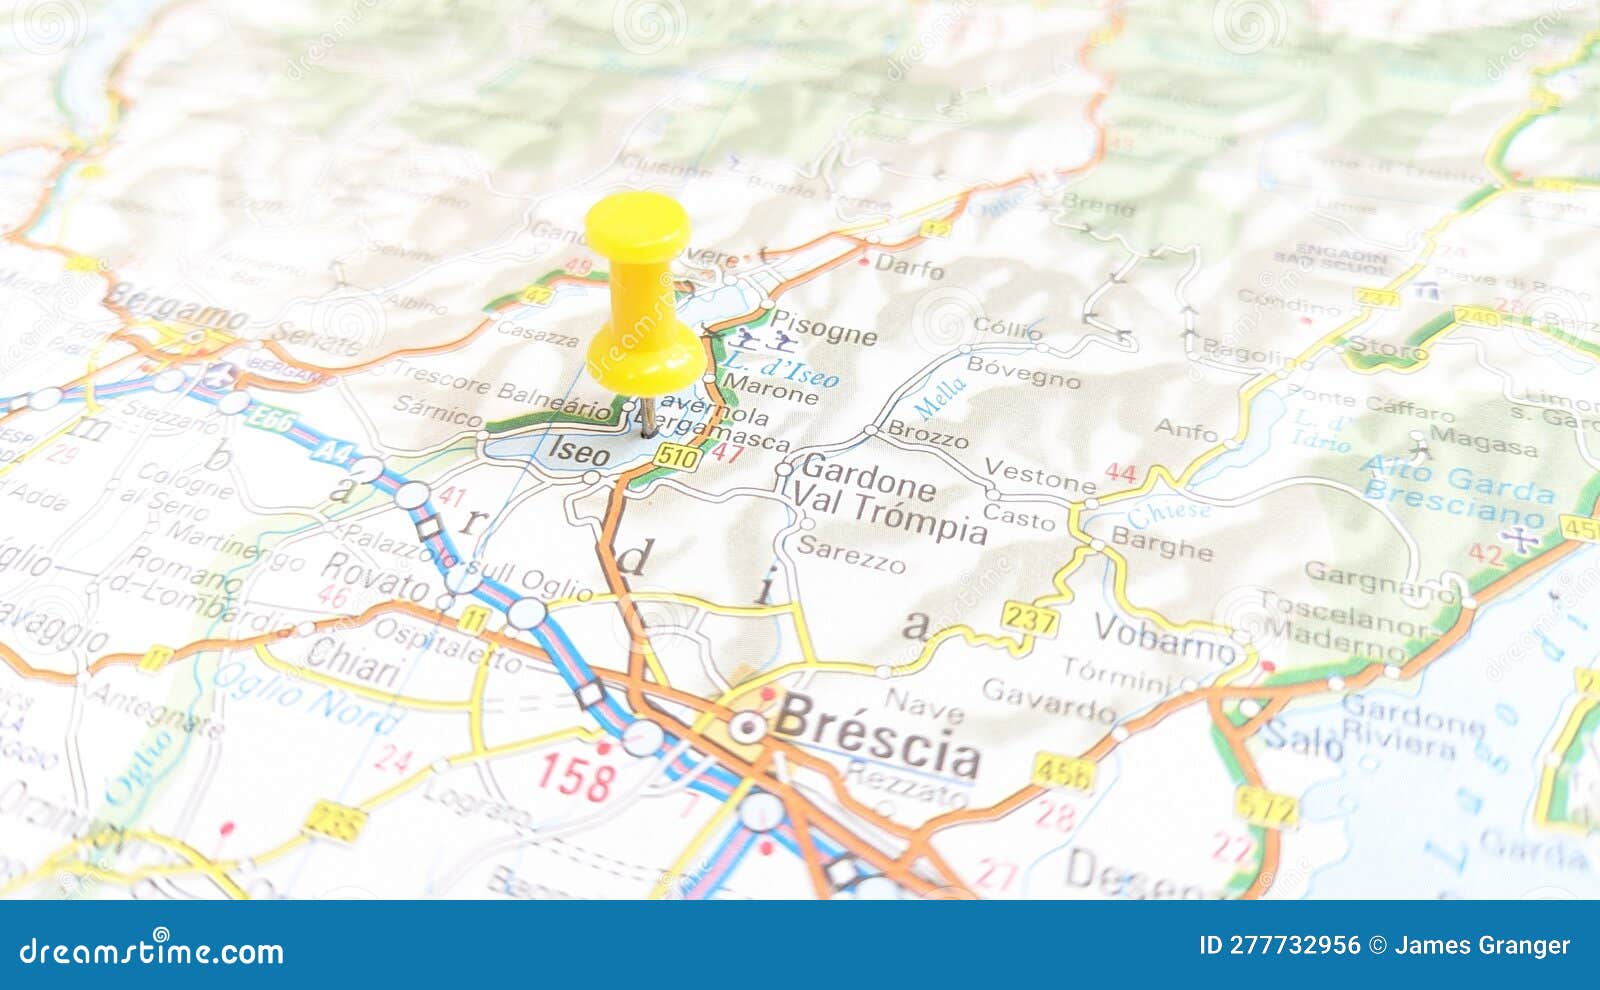 a yellow pin stuck in lake iseo on a map of italy